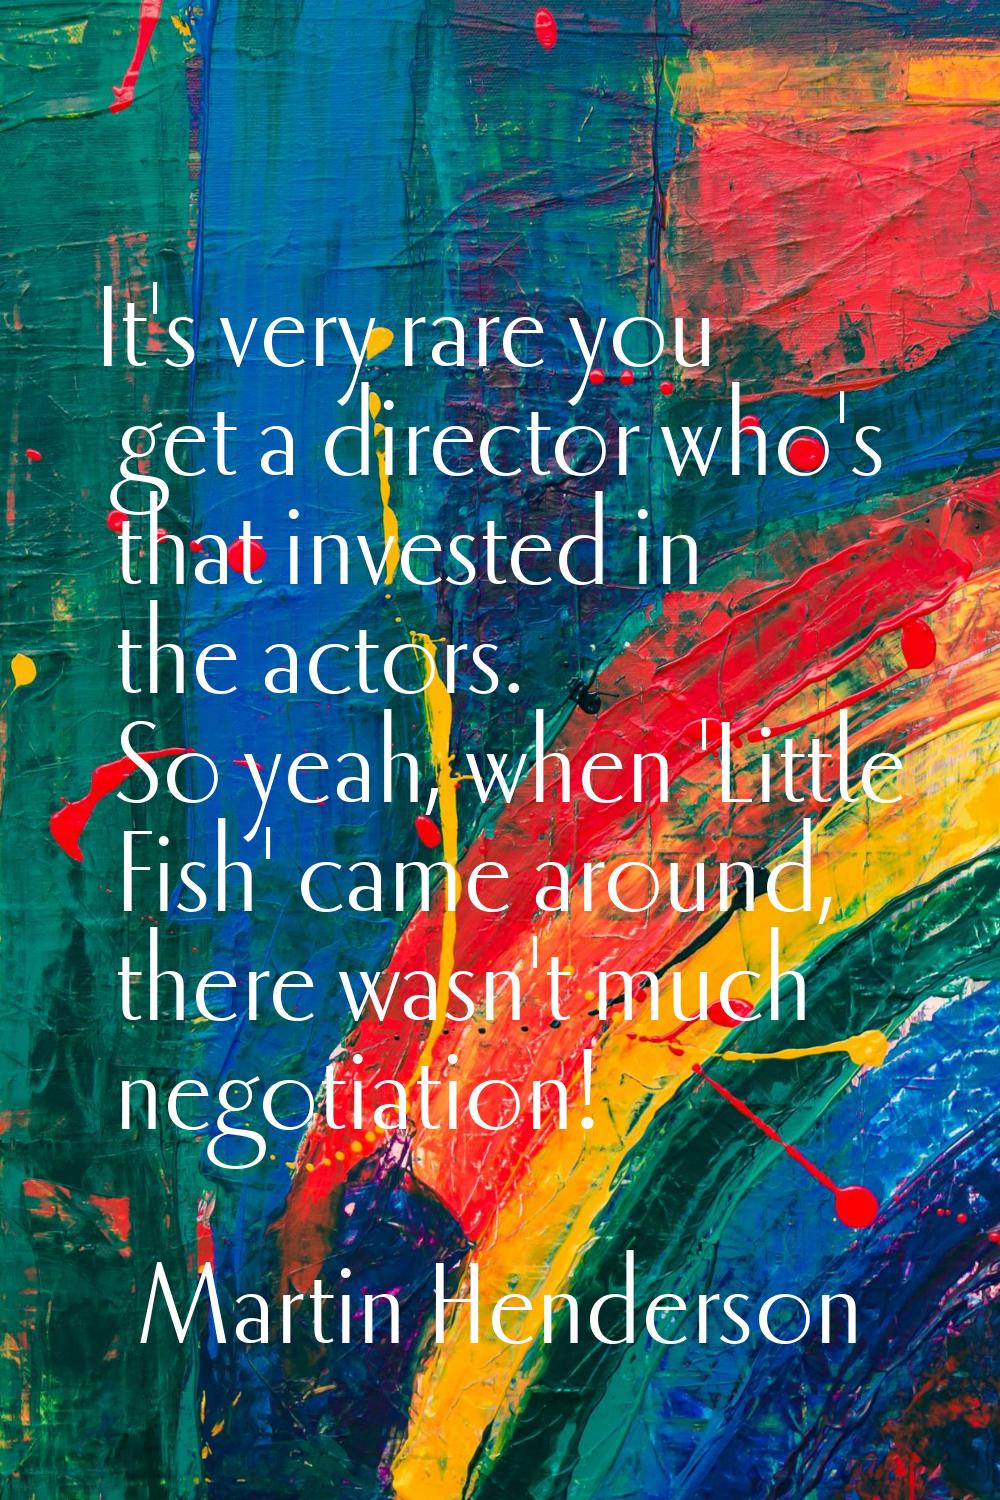 It's very rare you get a director who's that invested in the actors. So yeah, when 'Little Fish' ca